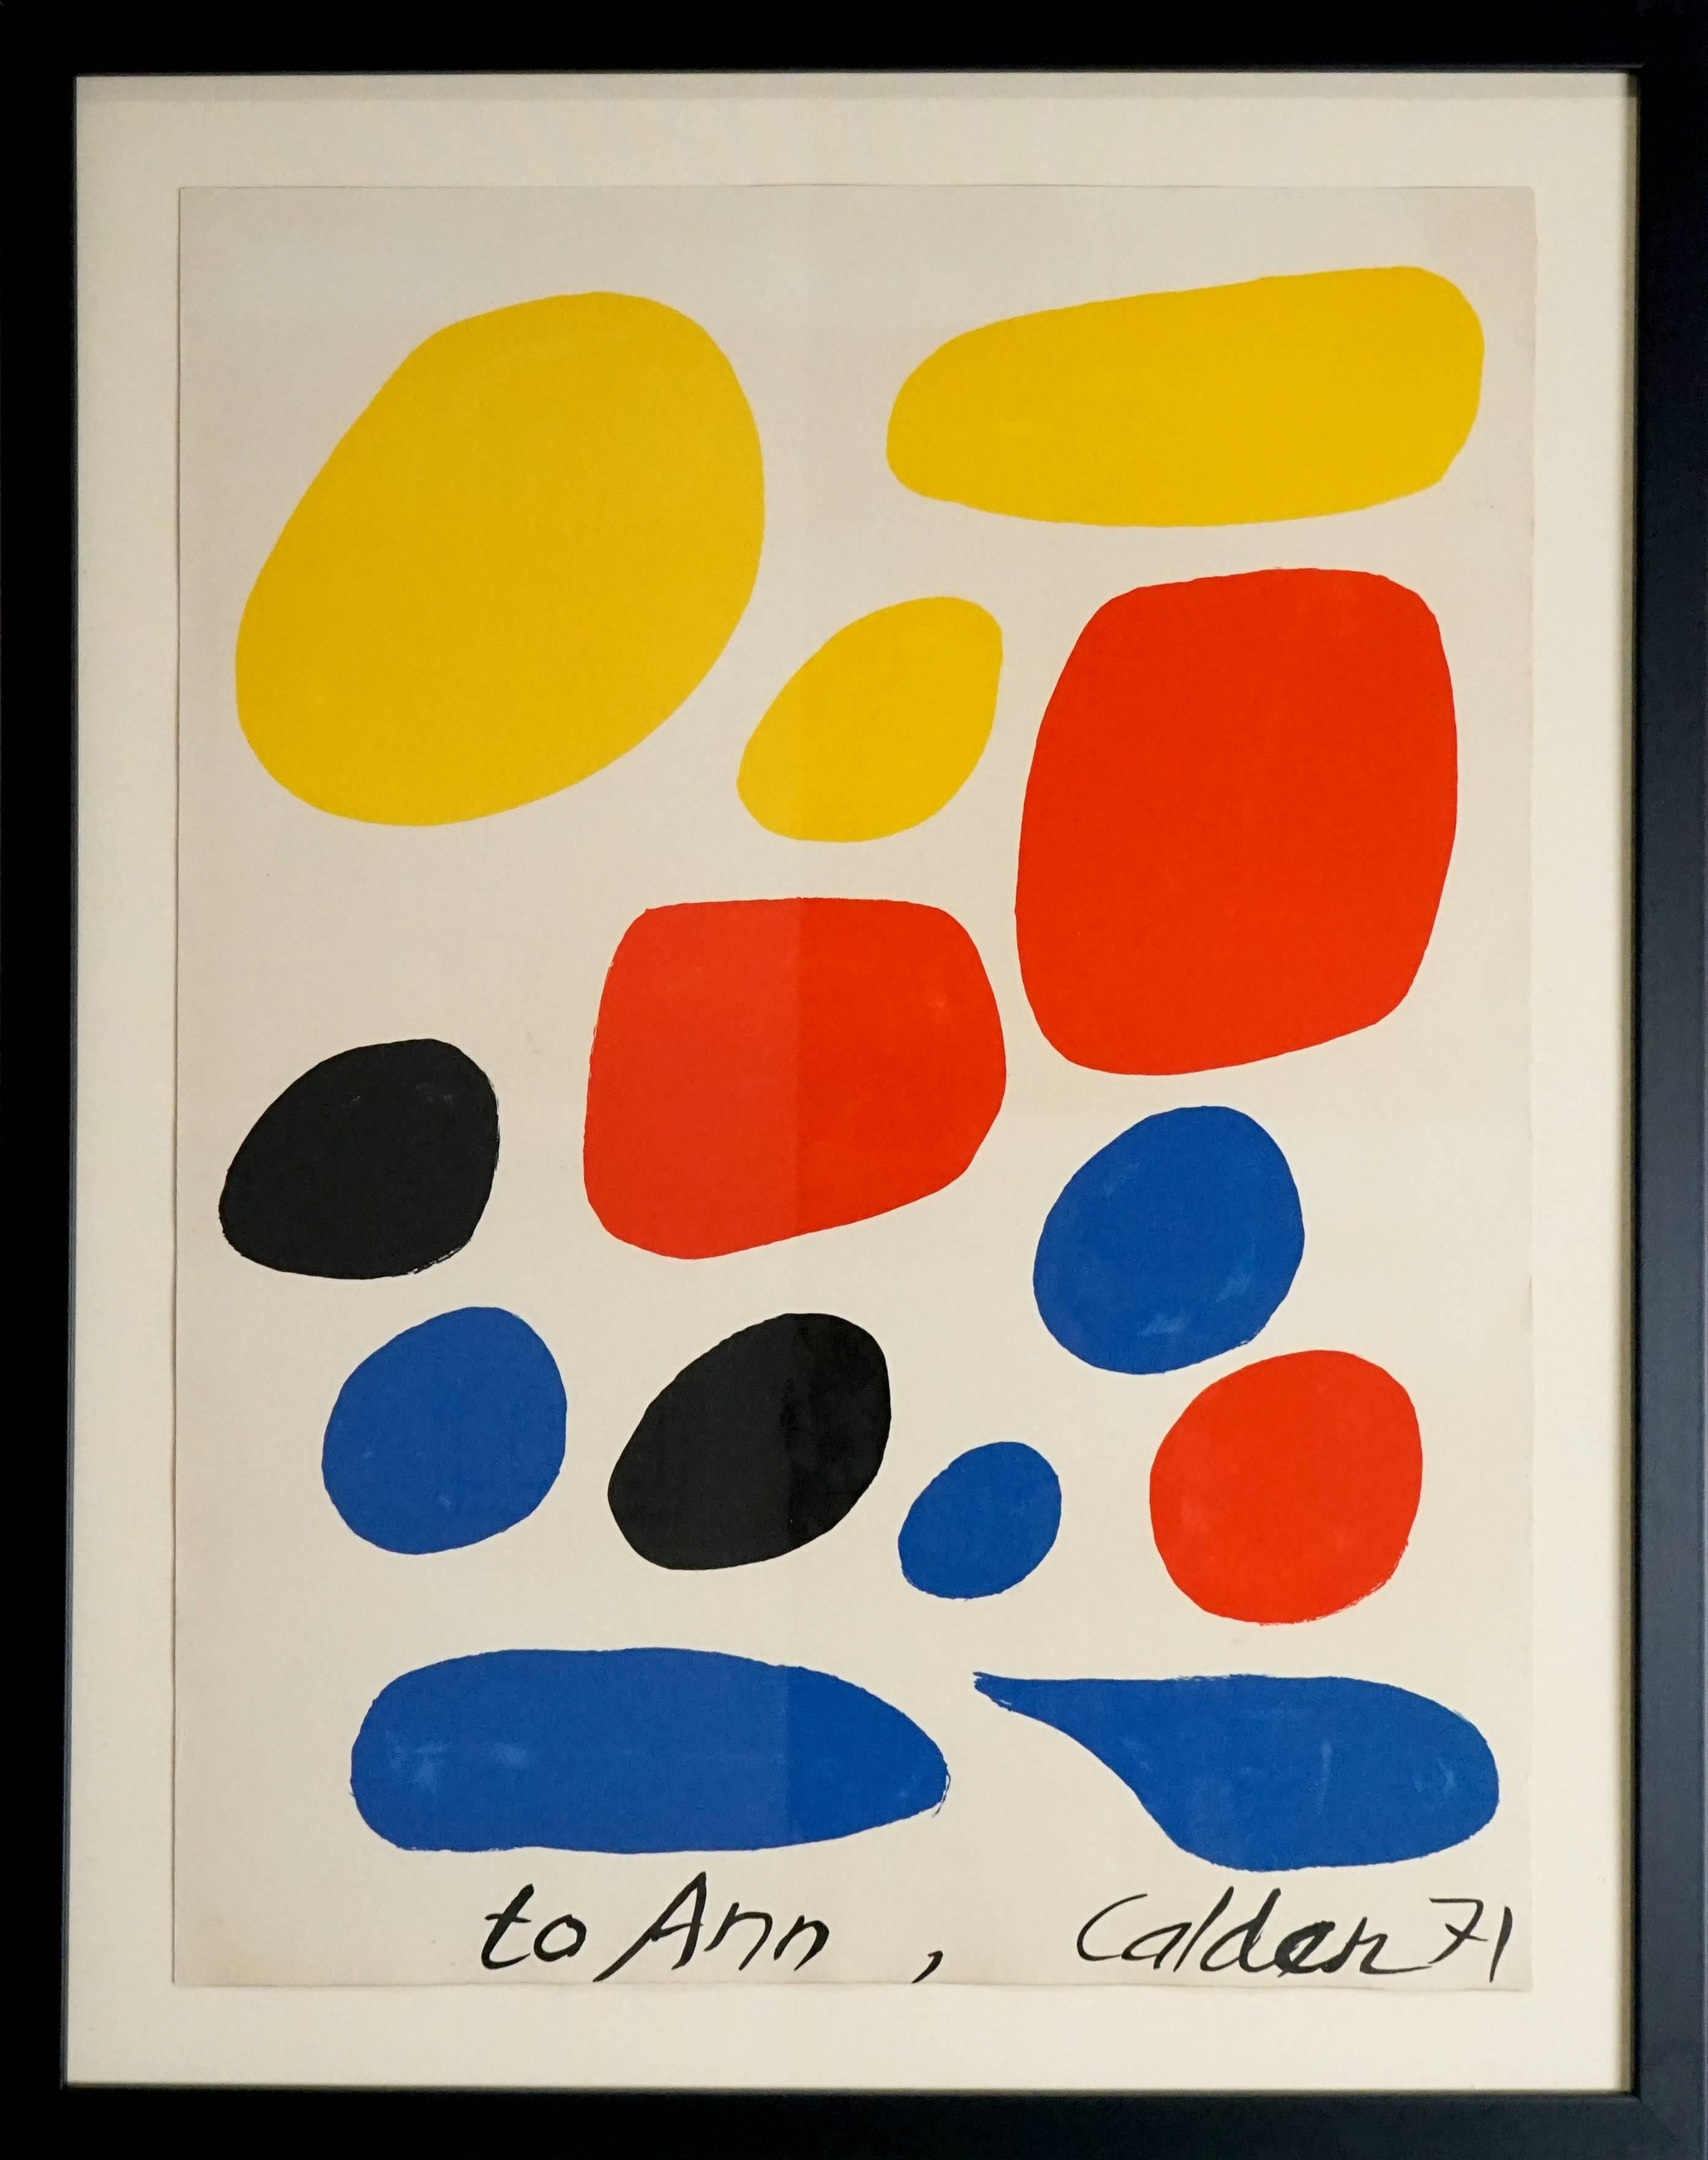 Alexander Calder Abstract Print - Untitled, Paris, 1971 (from the Deluxe Edition of Flight Portfolio, 1971)